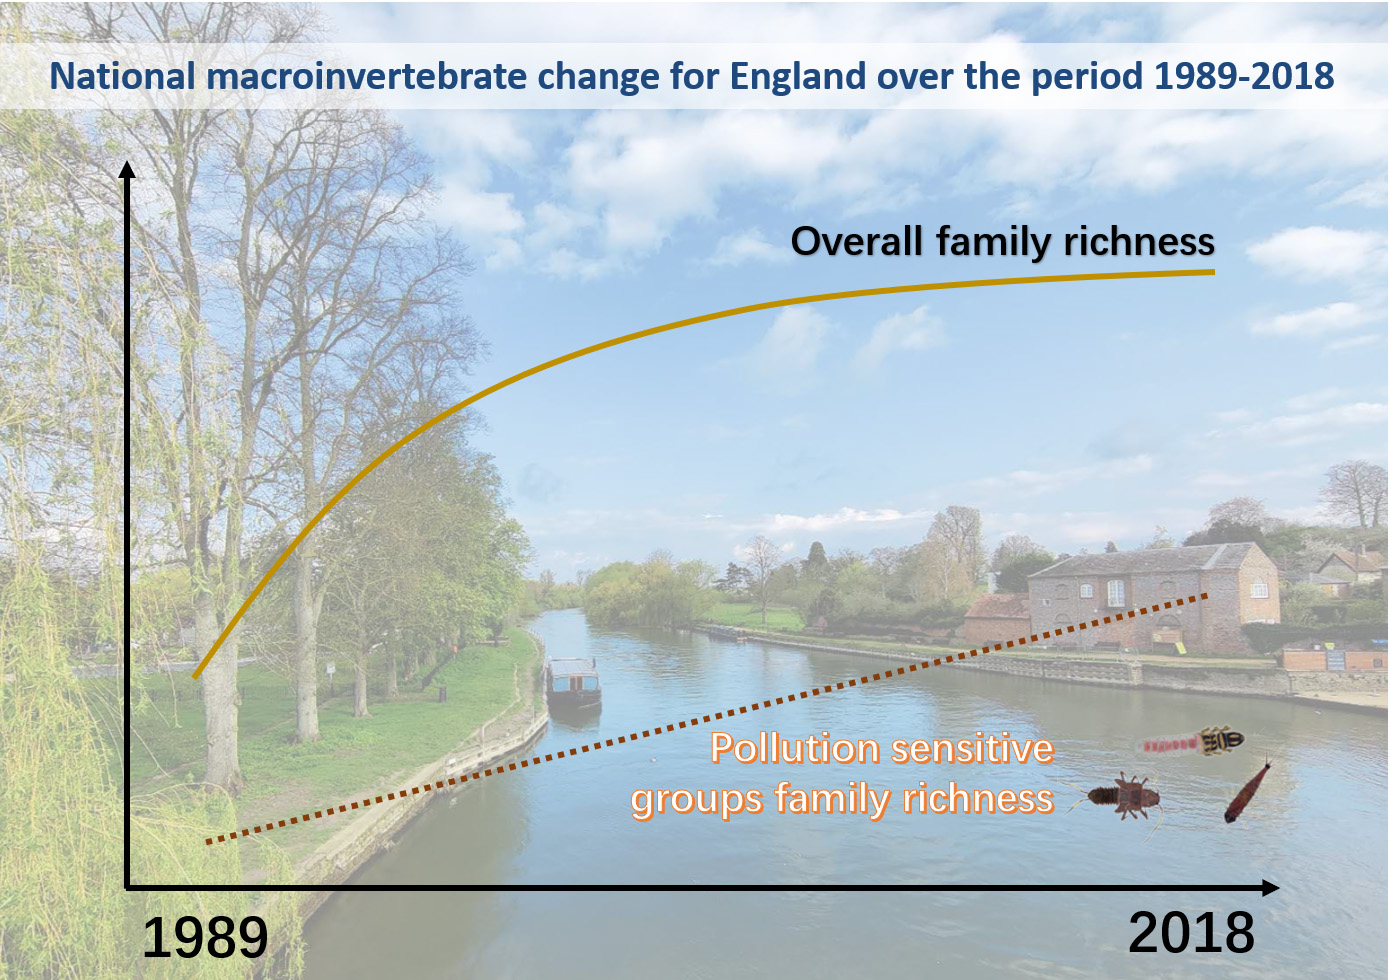 A graph shows trend of national macroinvertebrate change for England over the period 1989-2018